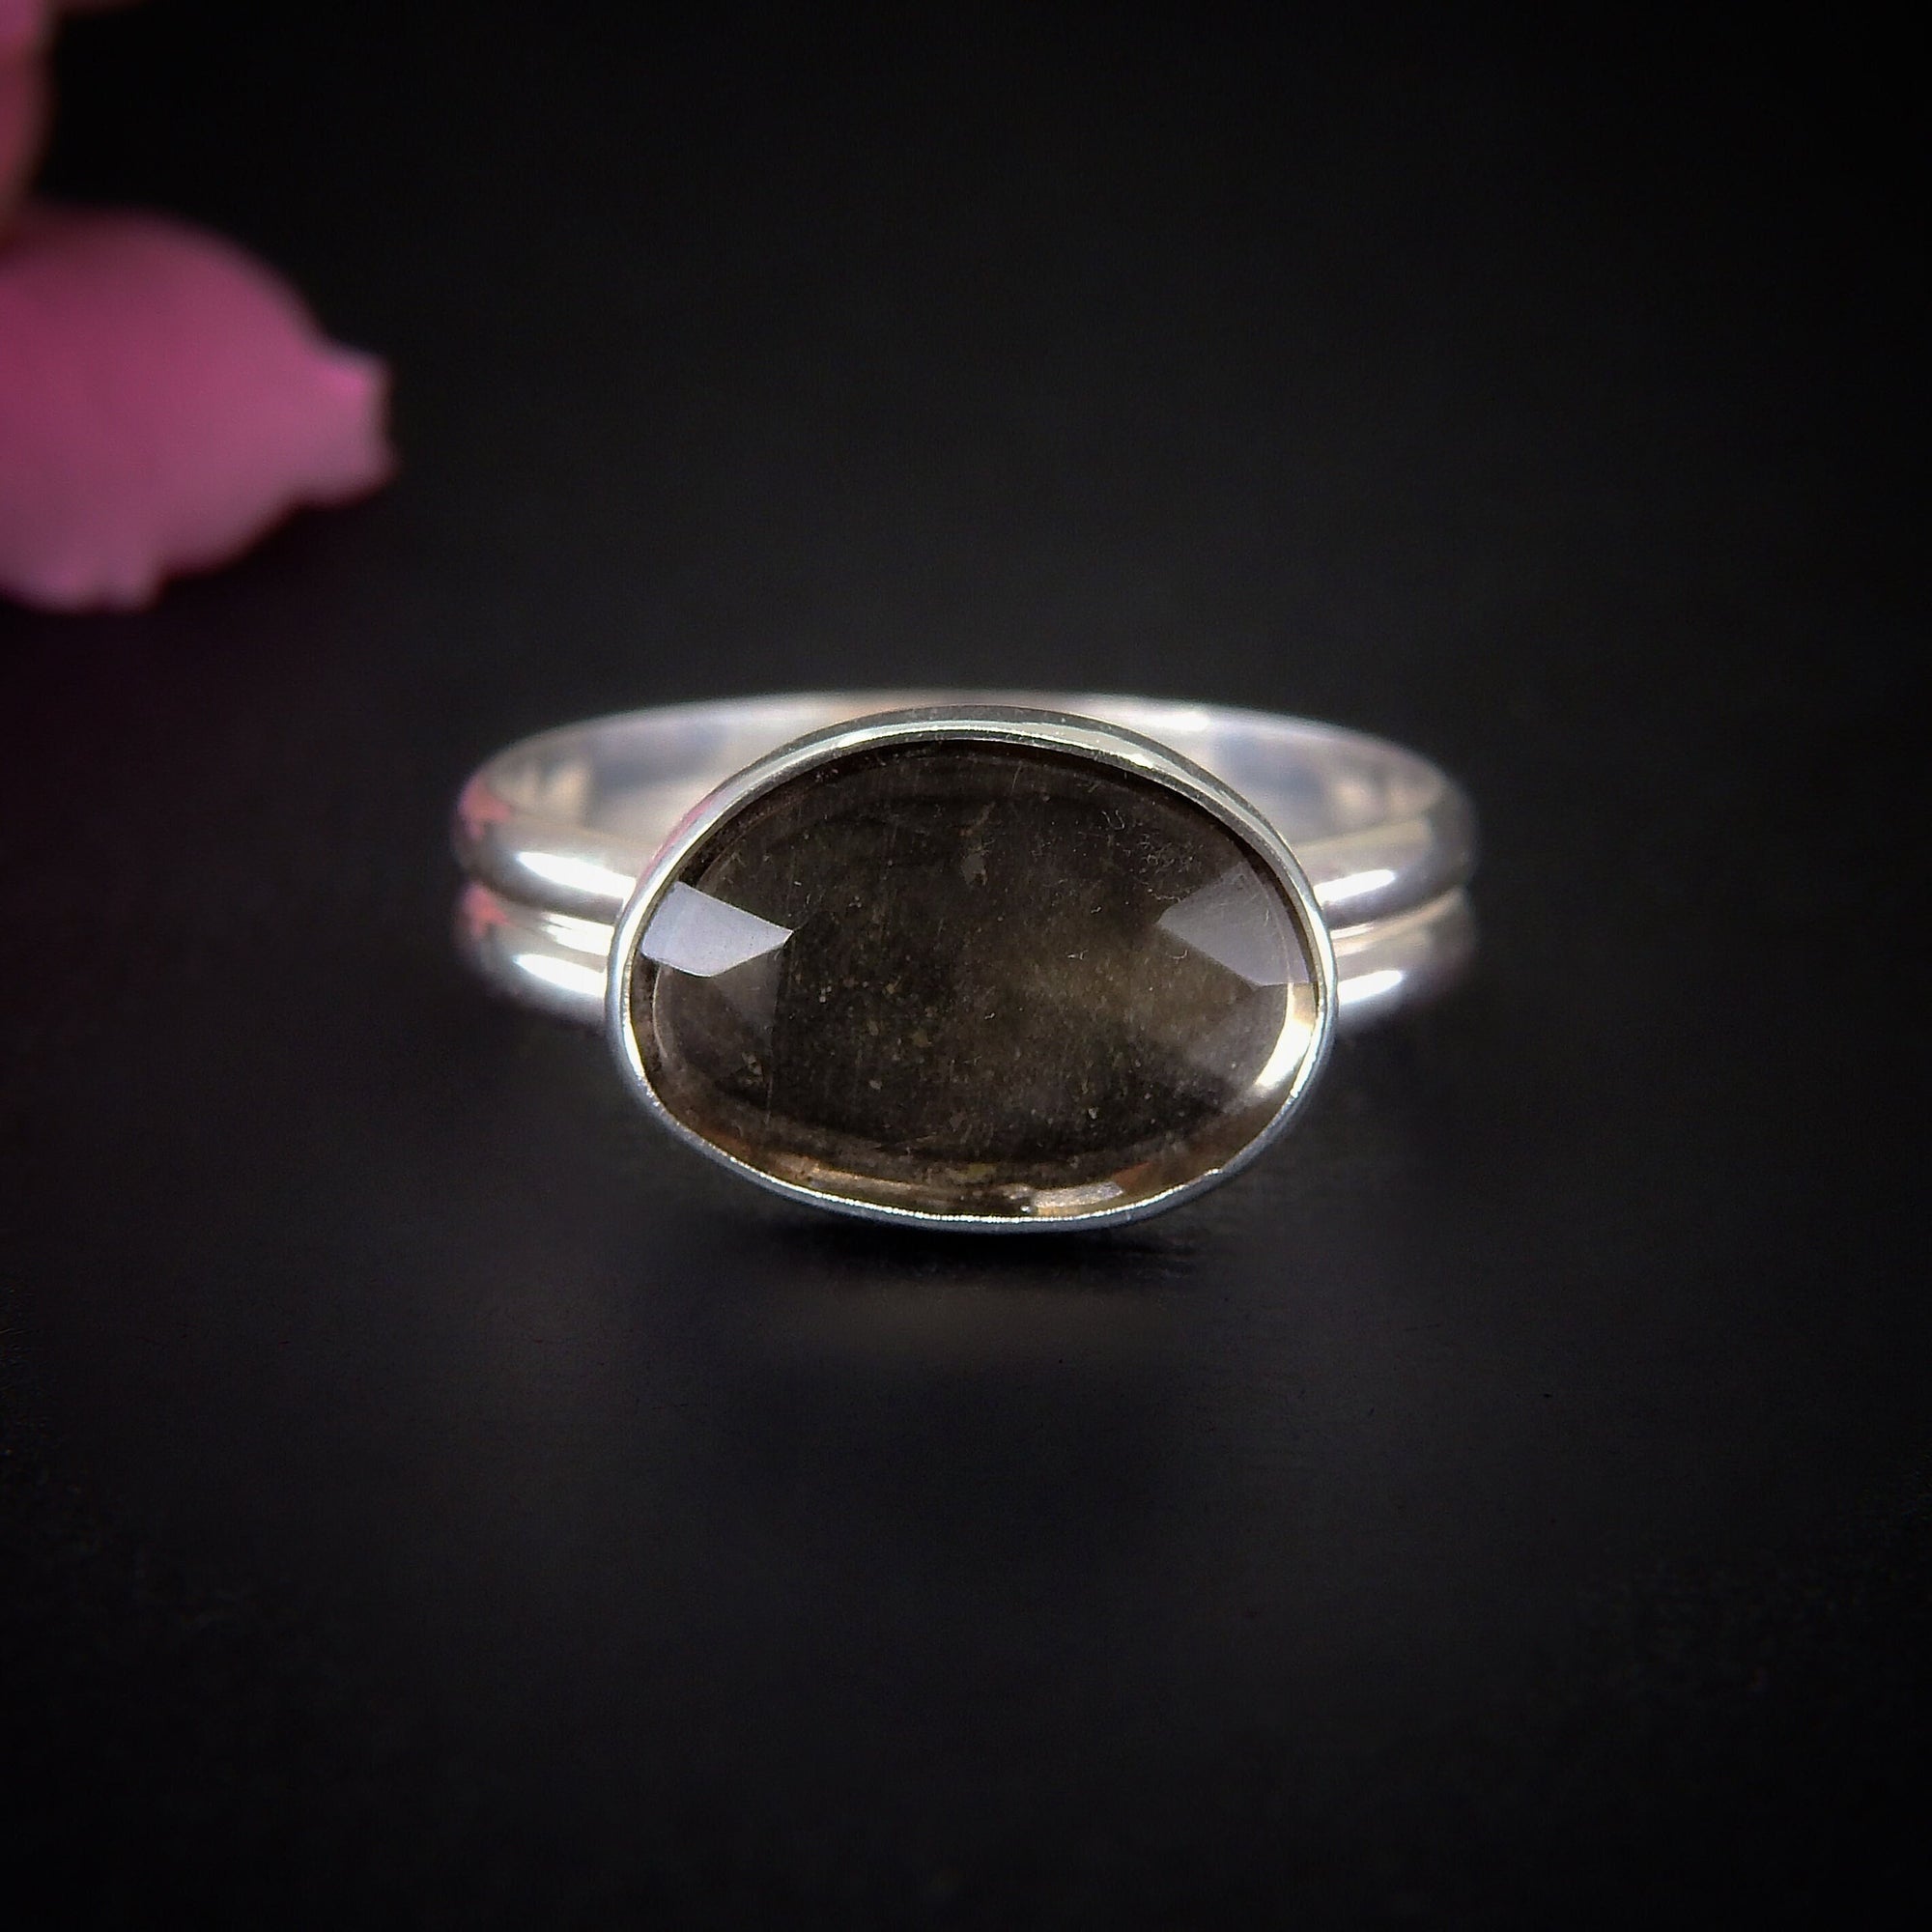 Rose Cut Smoky Quartz Ring - Size 10 1/2 - Sterling Silver - Dainty Smoky Quartz Jewellery - Faceted Gemstone Jewelry - Brown Crystal Ring